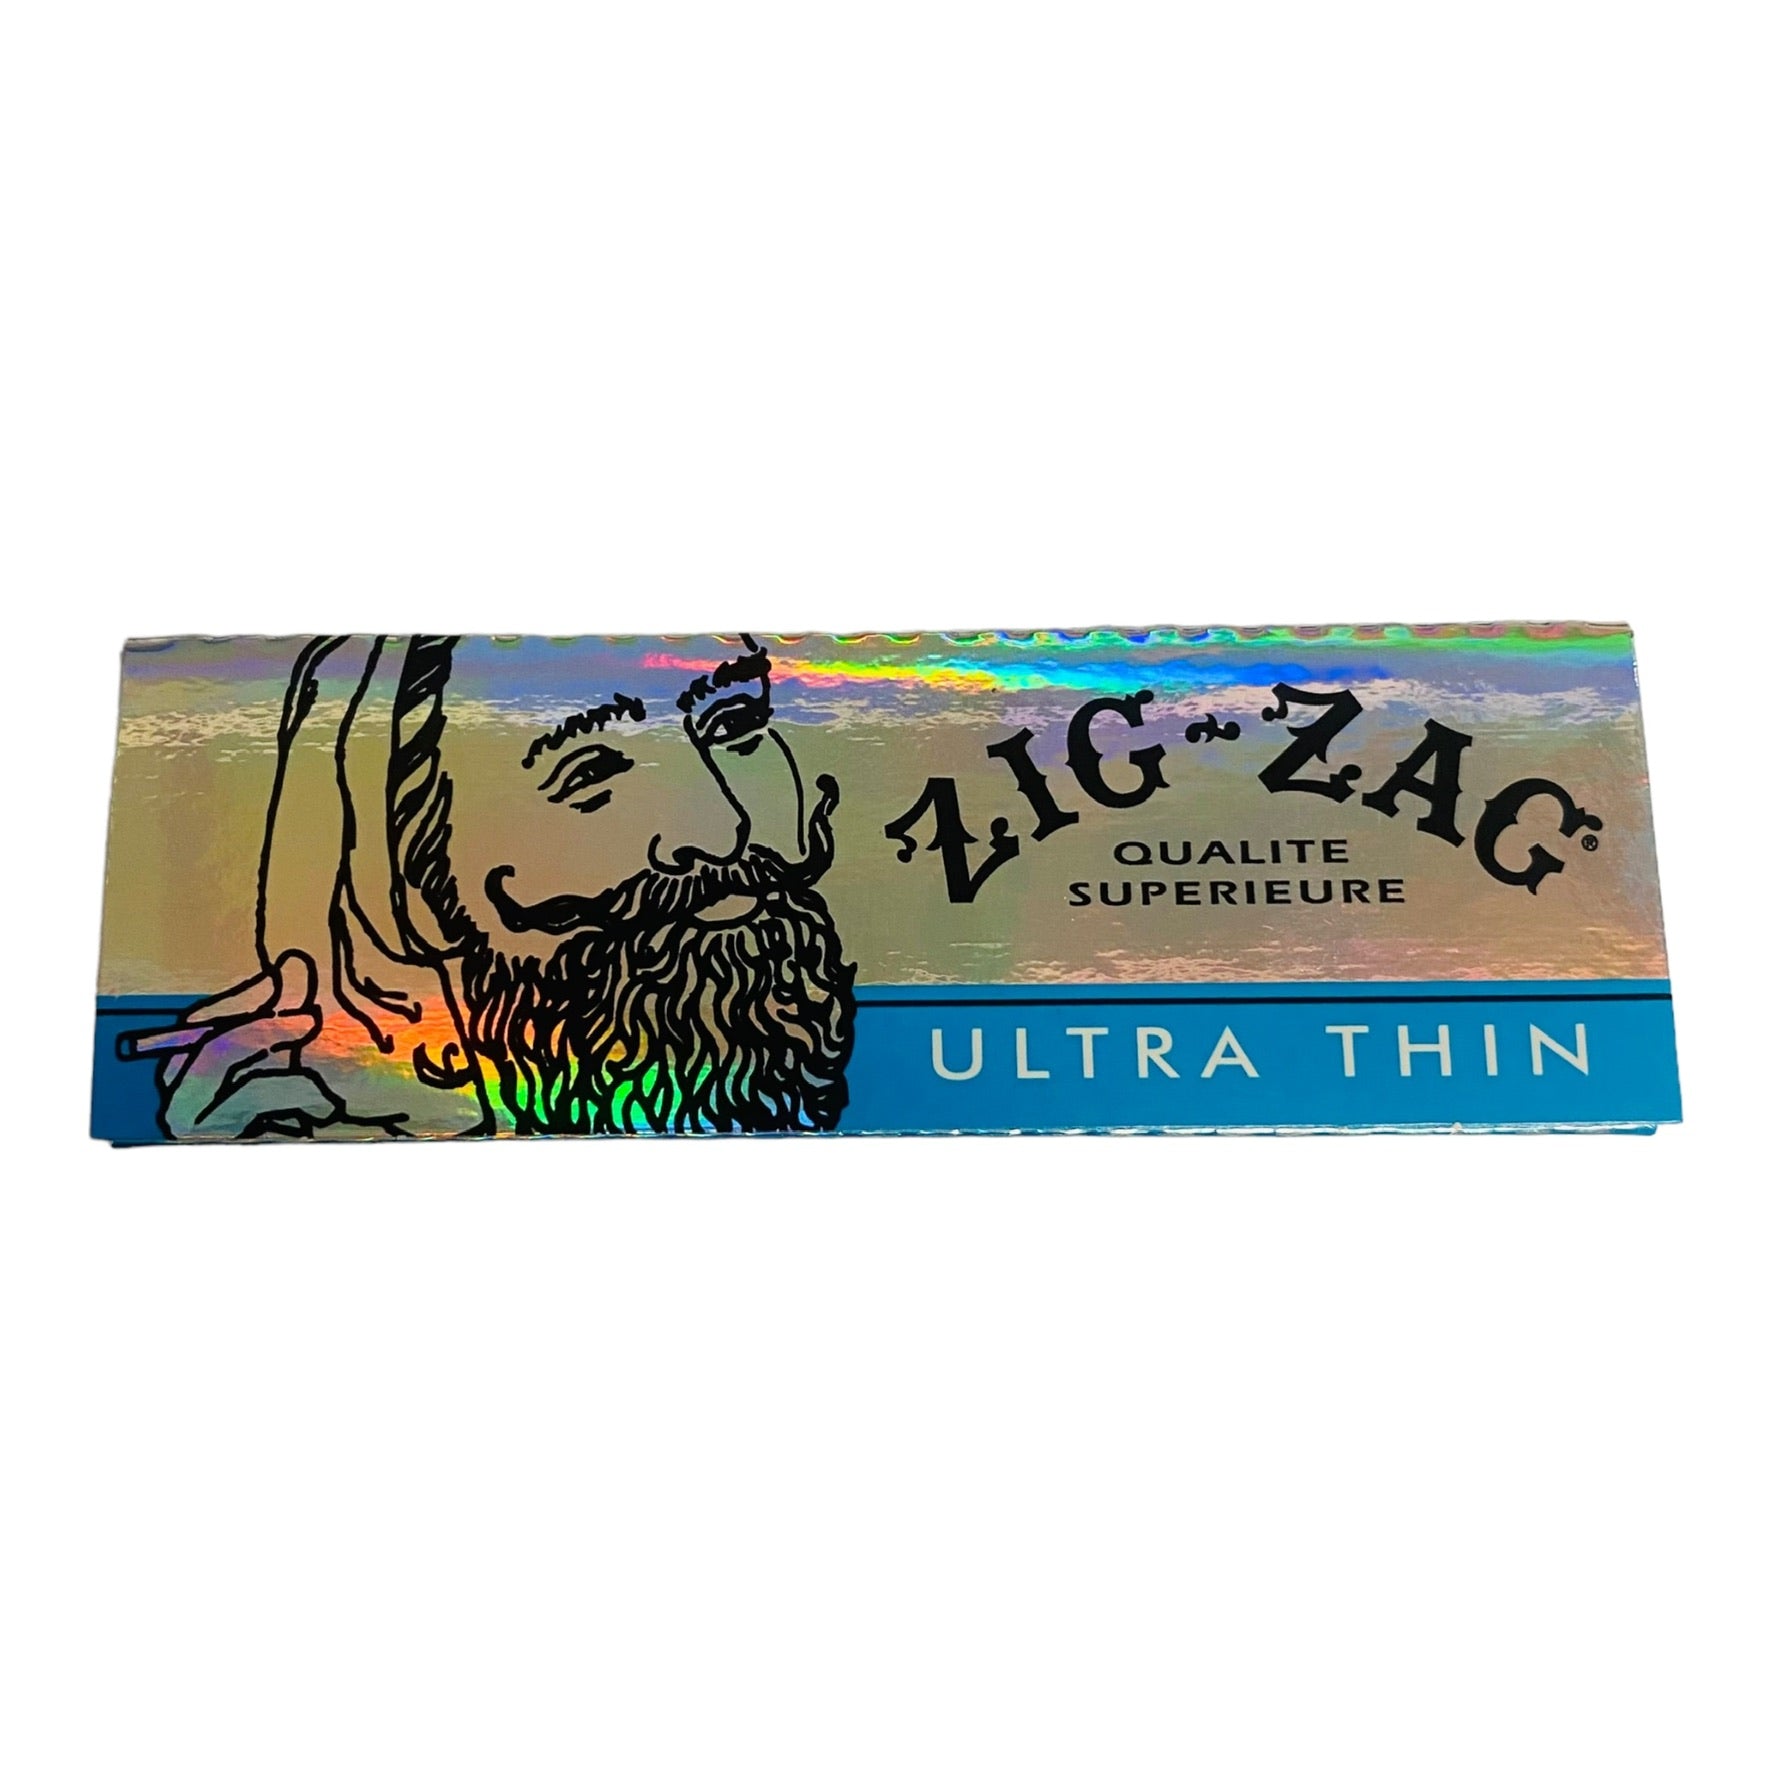 Zig Zag - Ultra Thin 1.25 Papers - 4 Packs